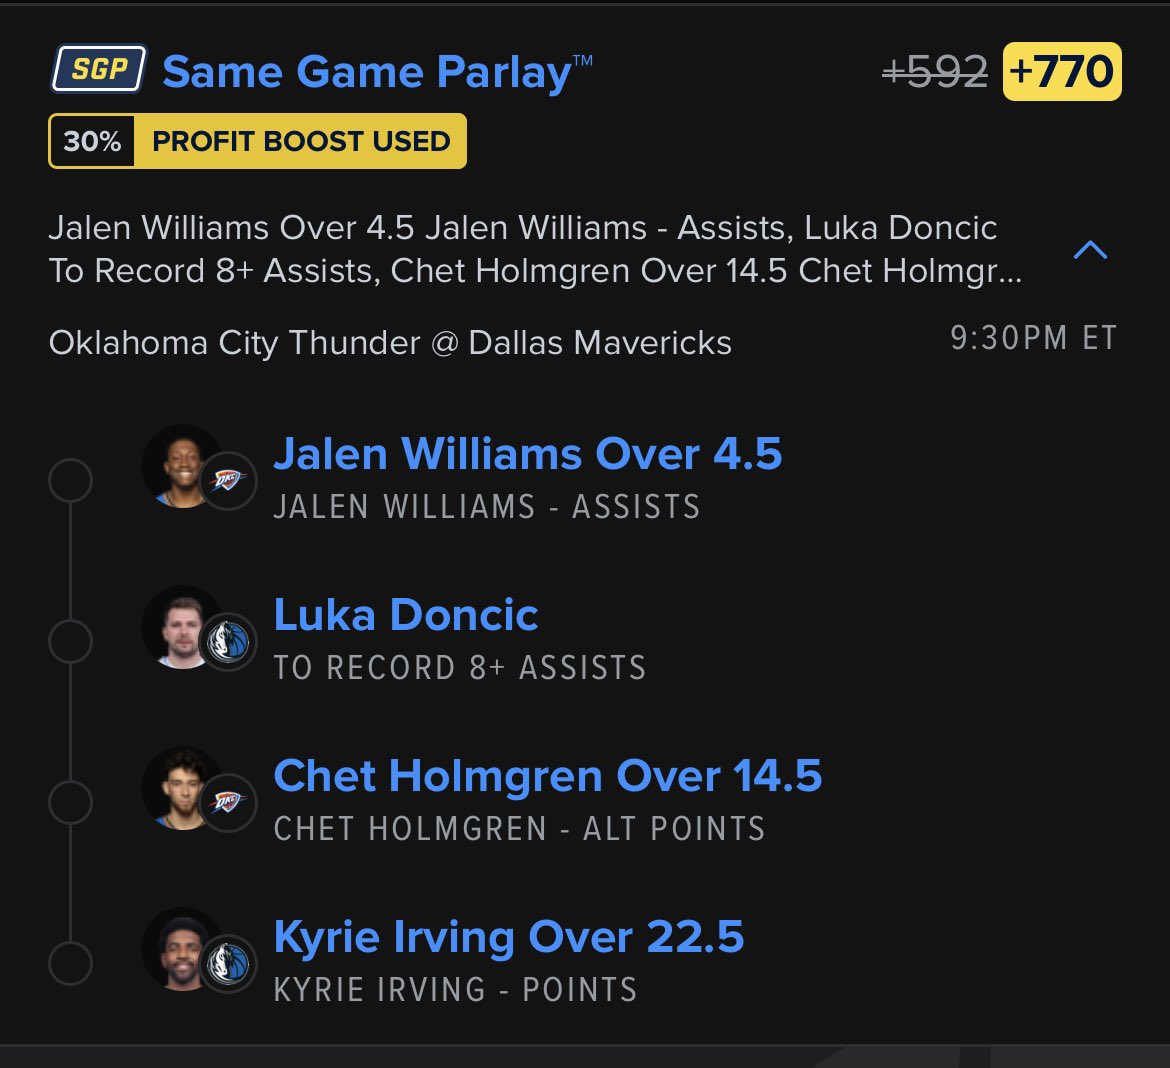 💰 +770 Odds SGP Same game parlay I’m loving for today! Use code “NBA” to join the discord for only $10 for your first month! Let’s get it! 🫡 #gamblingx Full card posted here: whop.com/premierpicks/